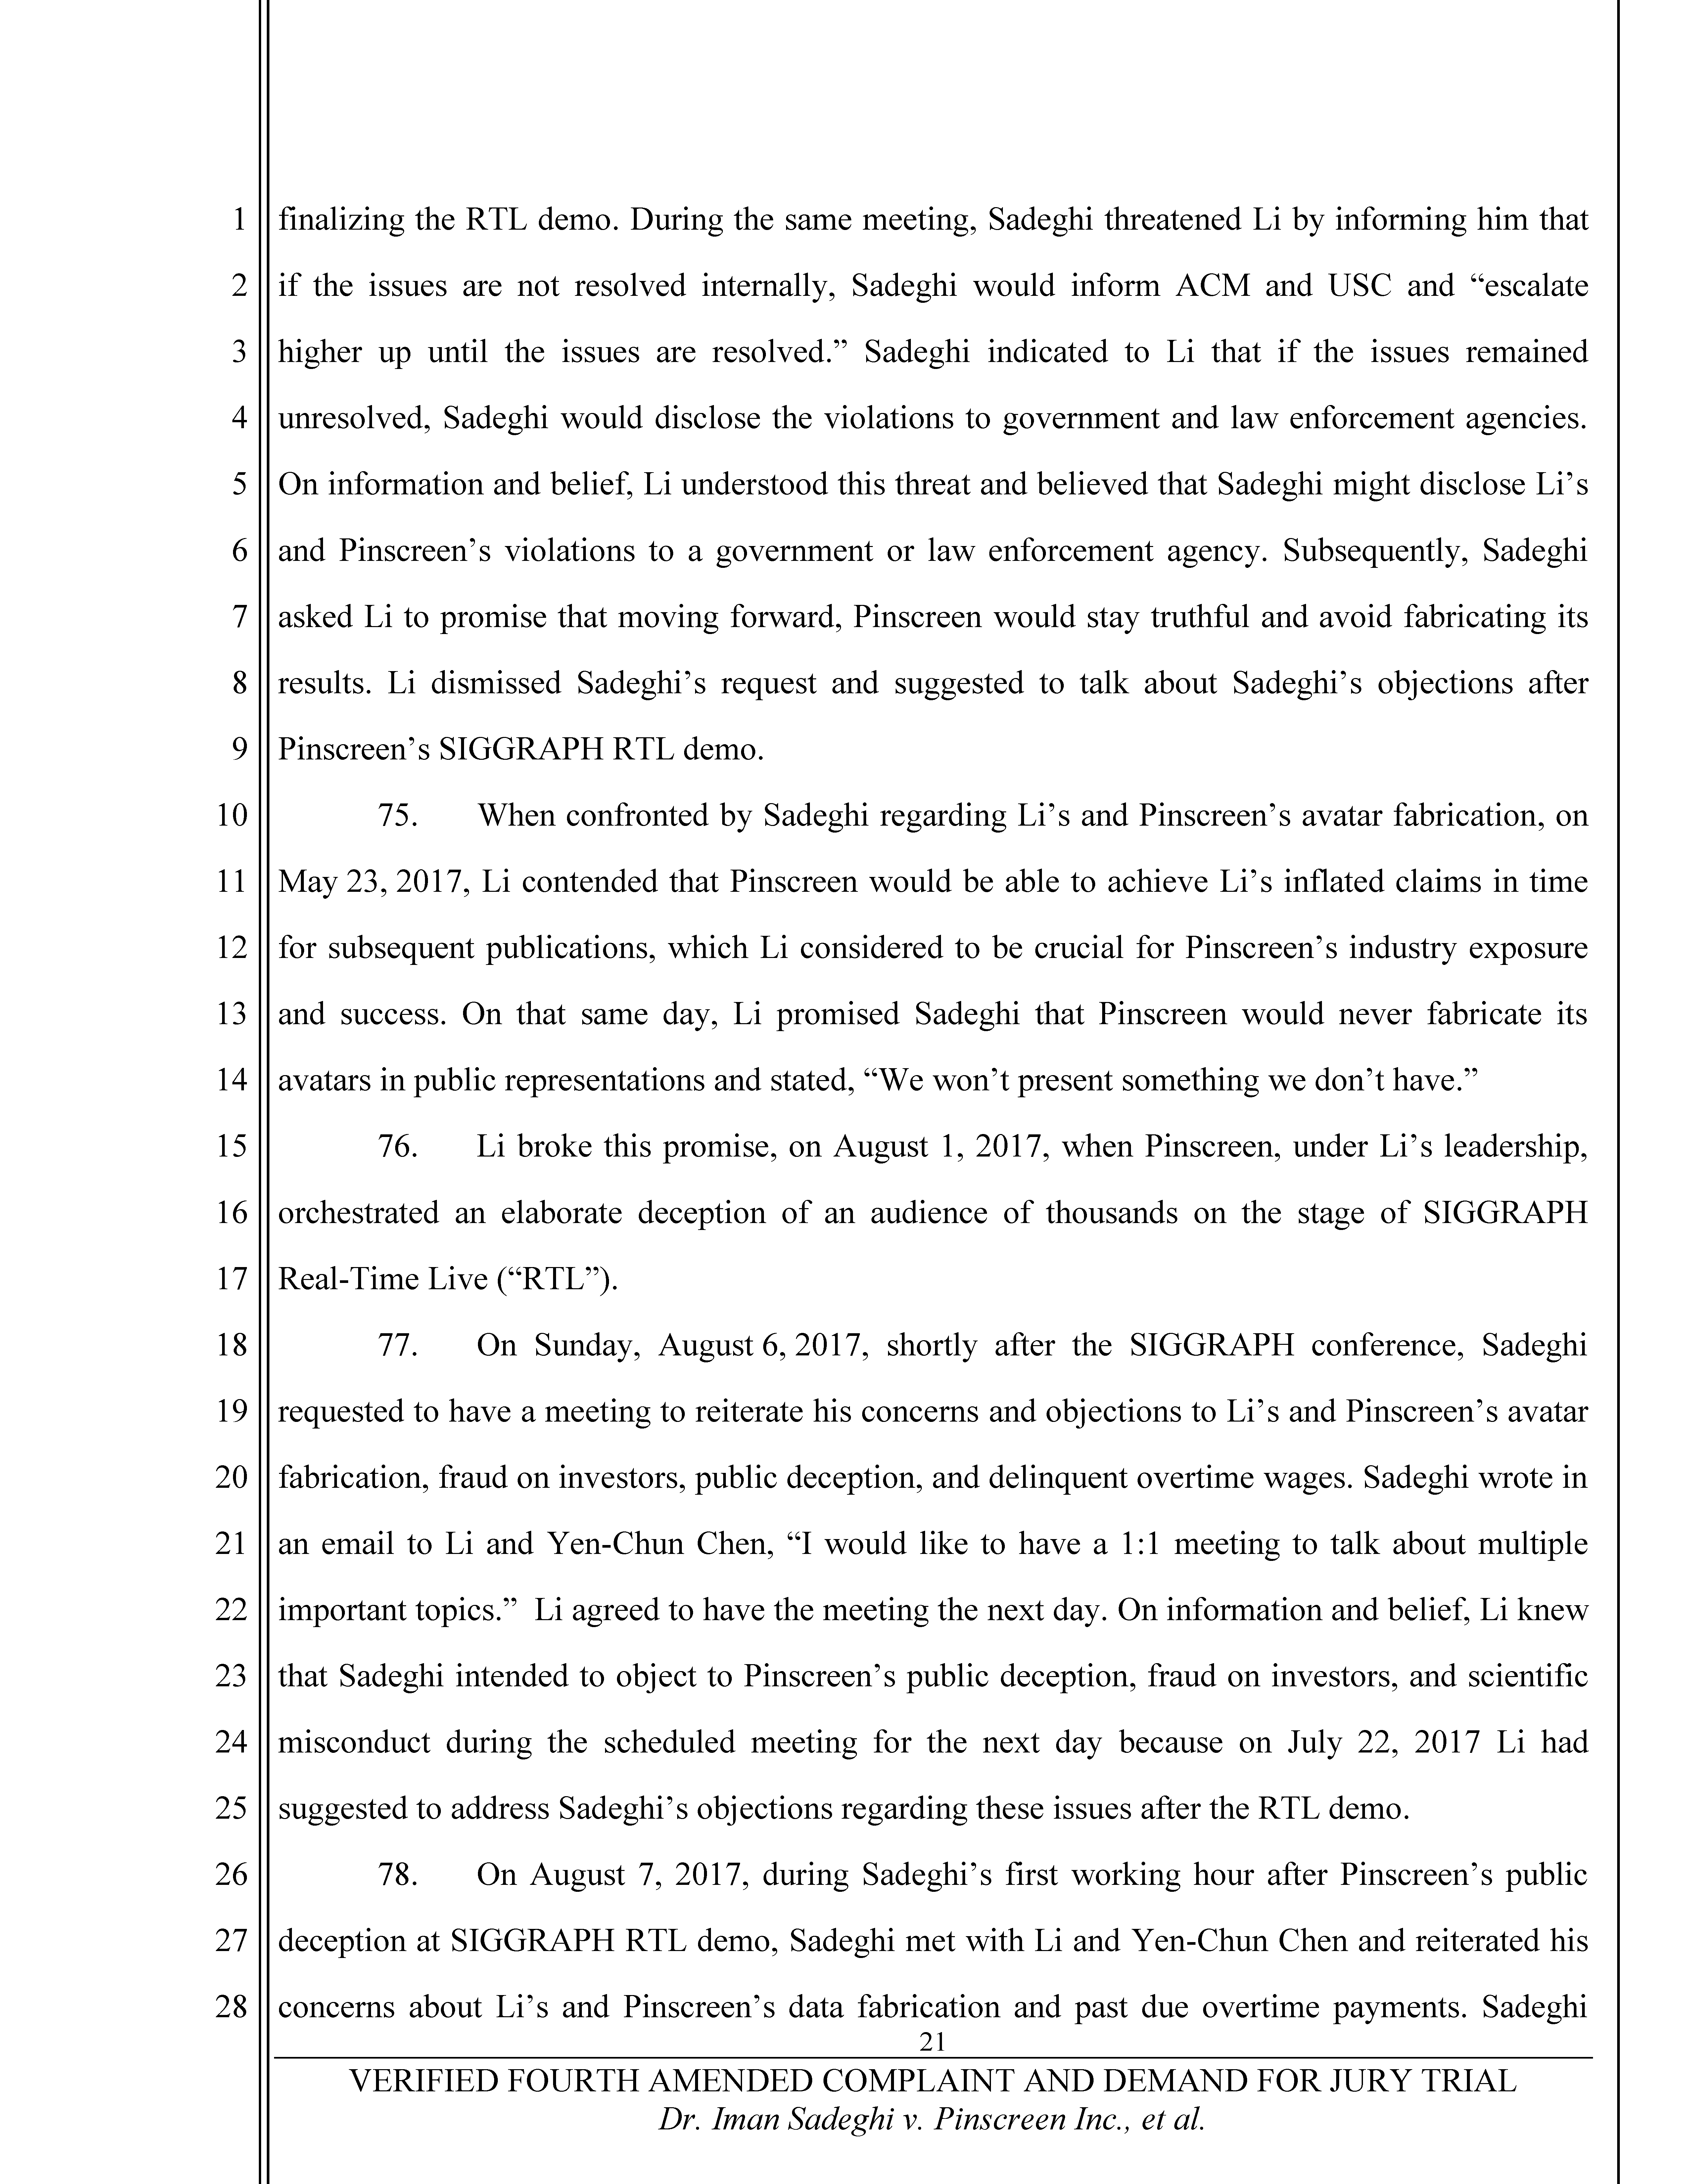 Fourth Amended Complaint (4AC) Page 22